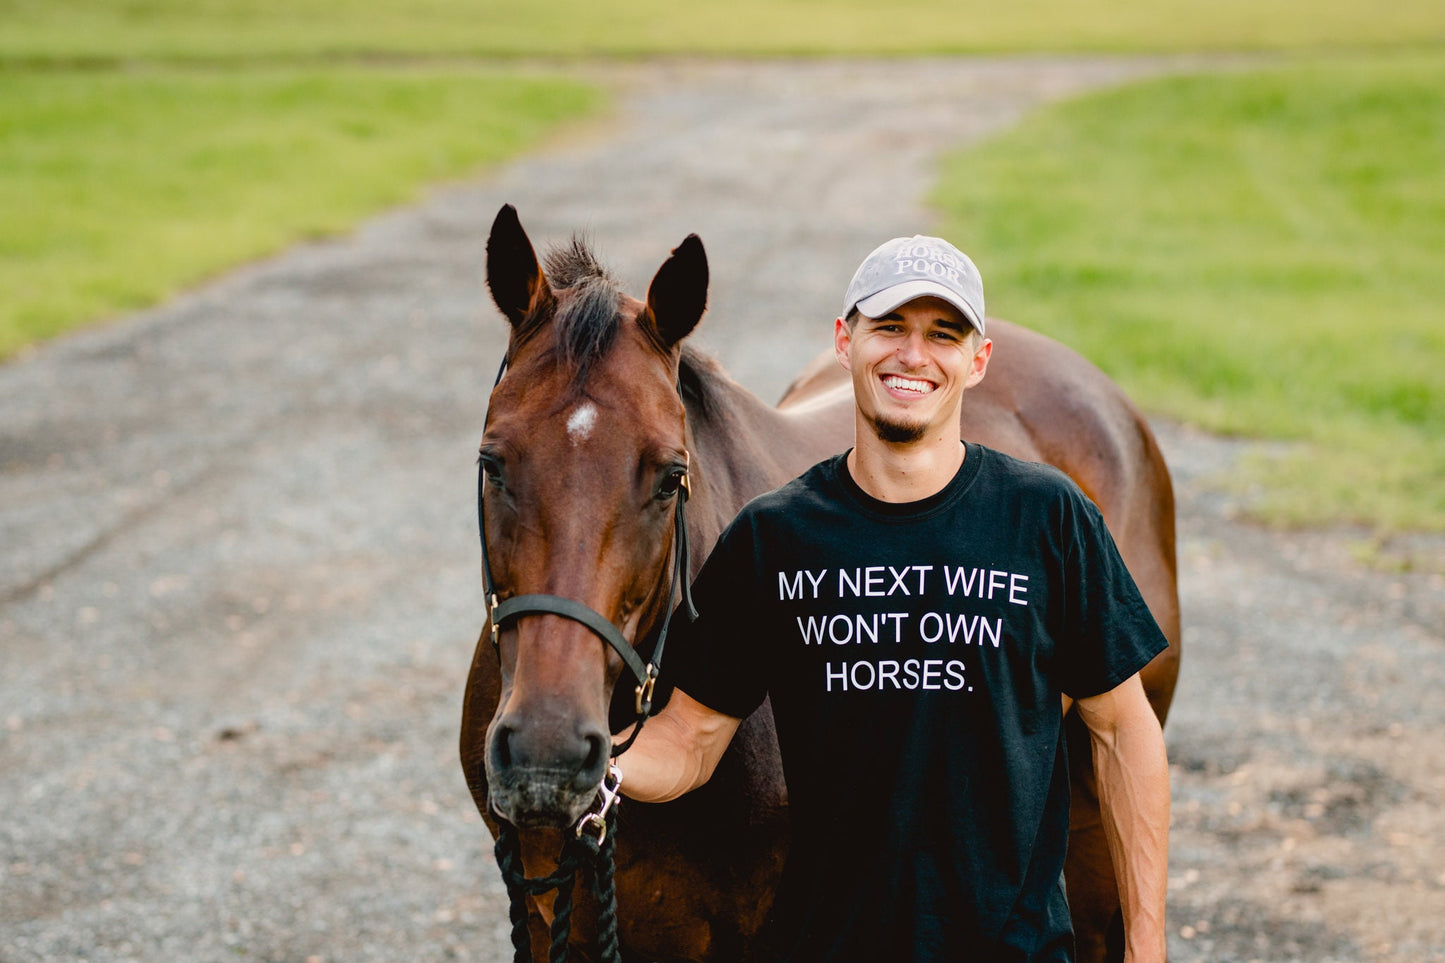 Next wife, Wont own horses.